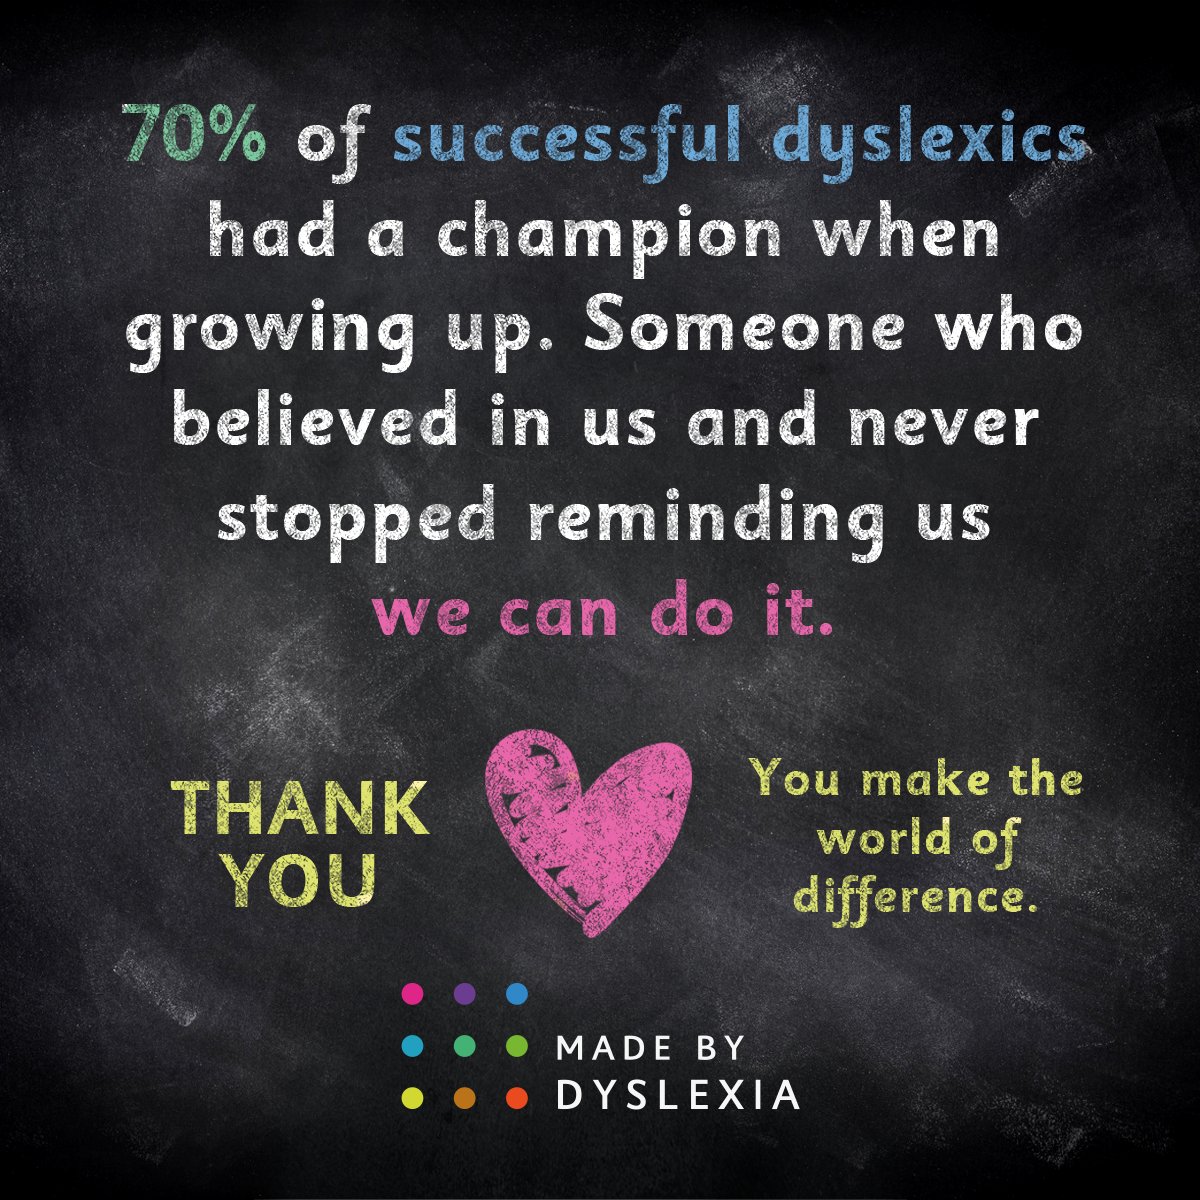 It's International #MothersDay! 💛 Today, we're celebrating the amazing mums in our lives who have raised us to believe anything is possible when we champion our incredible #DyslexicStrengths